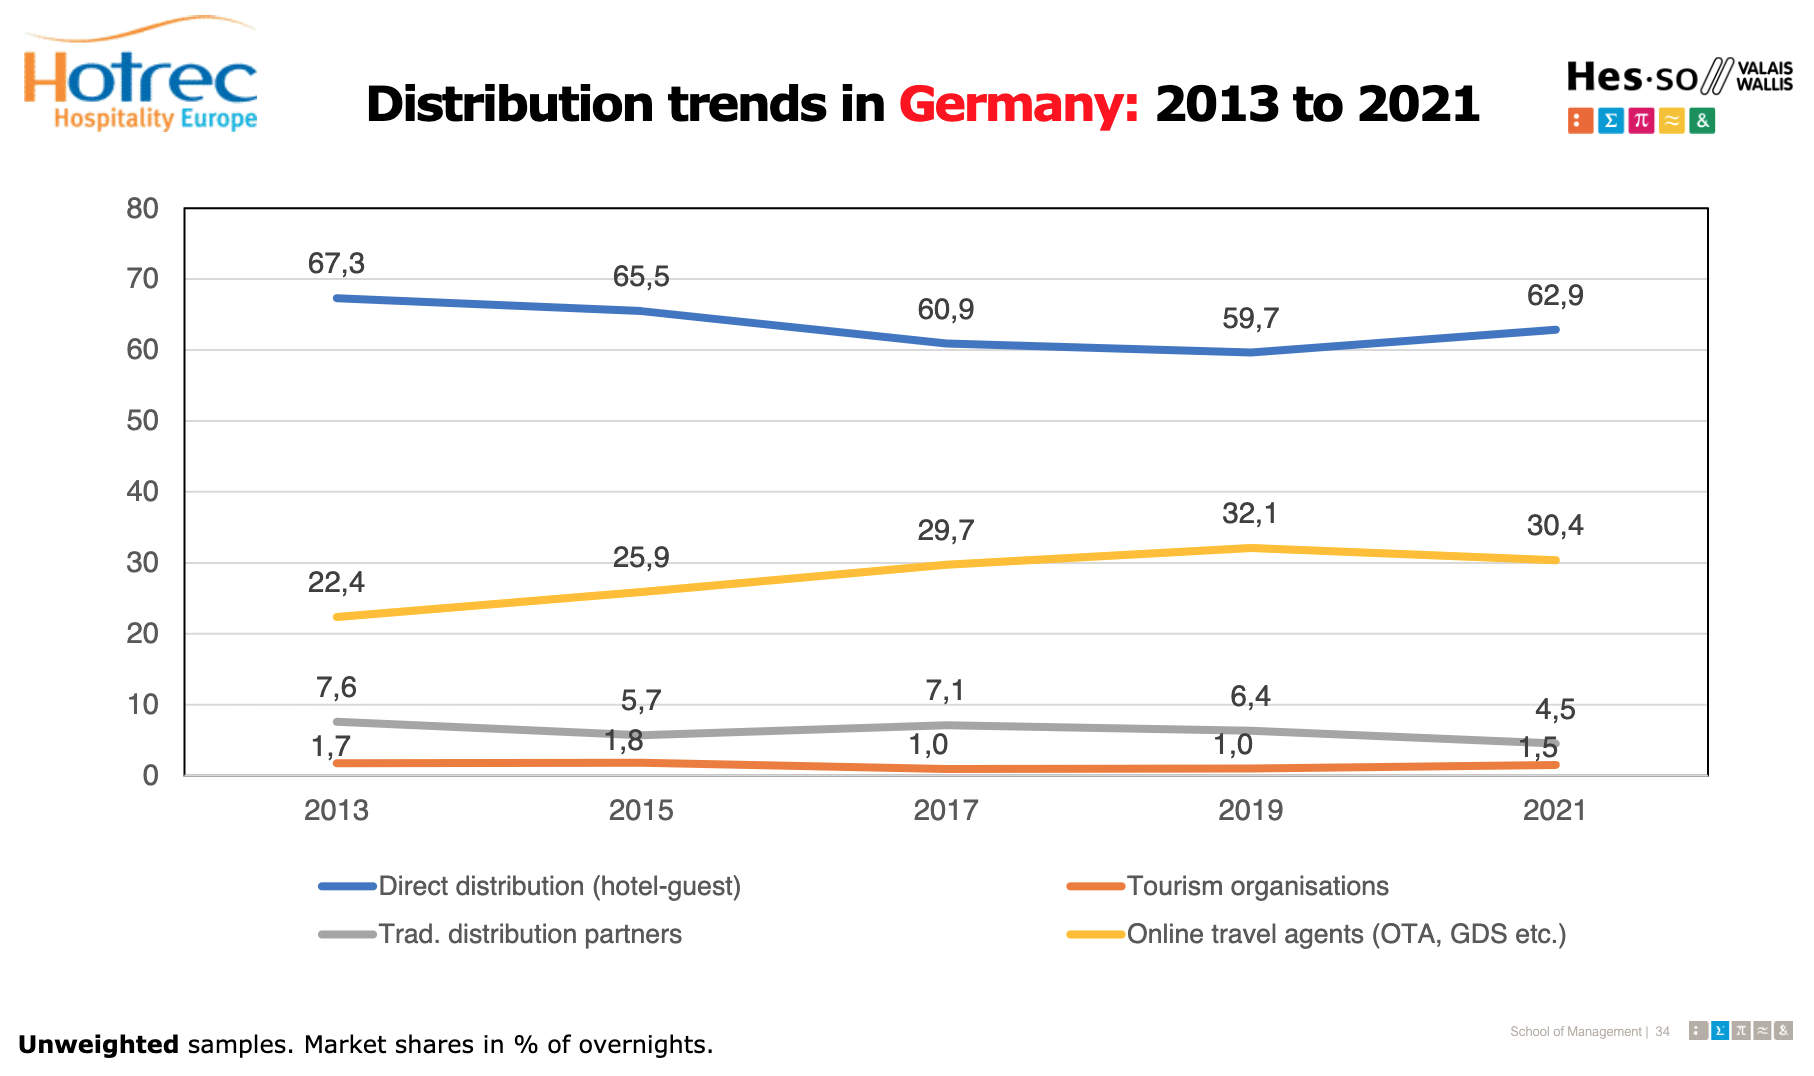 Distribution trends in Germany: 2013 to 2021